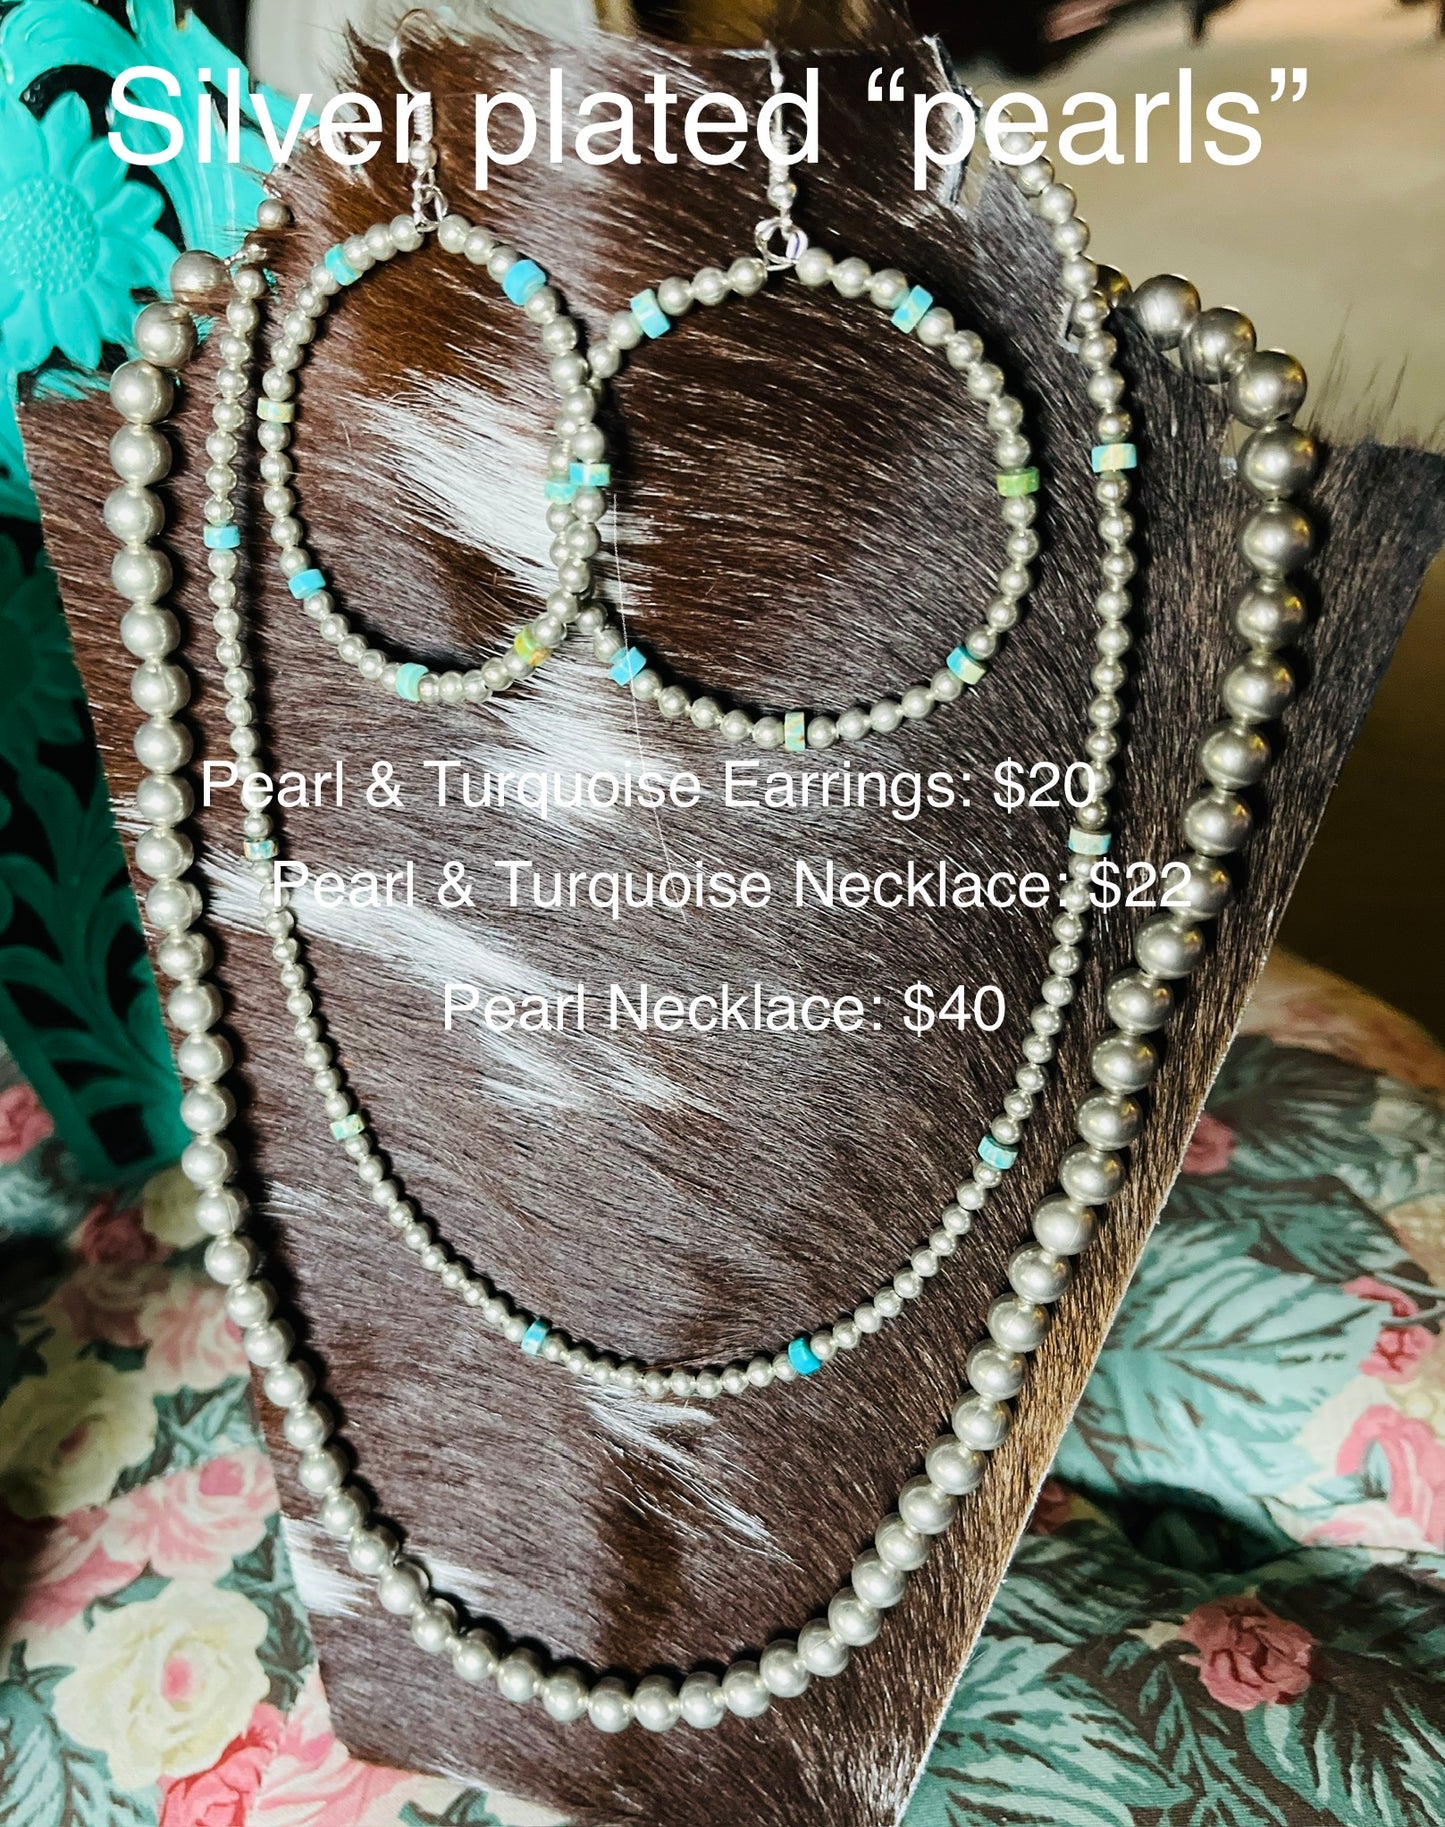 Real turquoise and silver plated pearl necklace